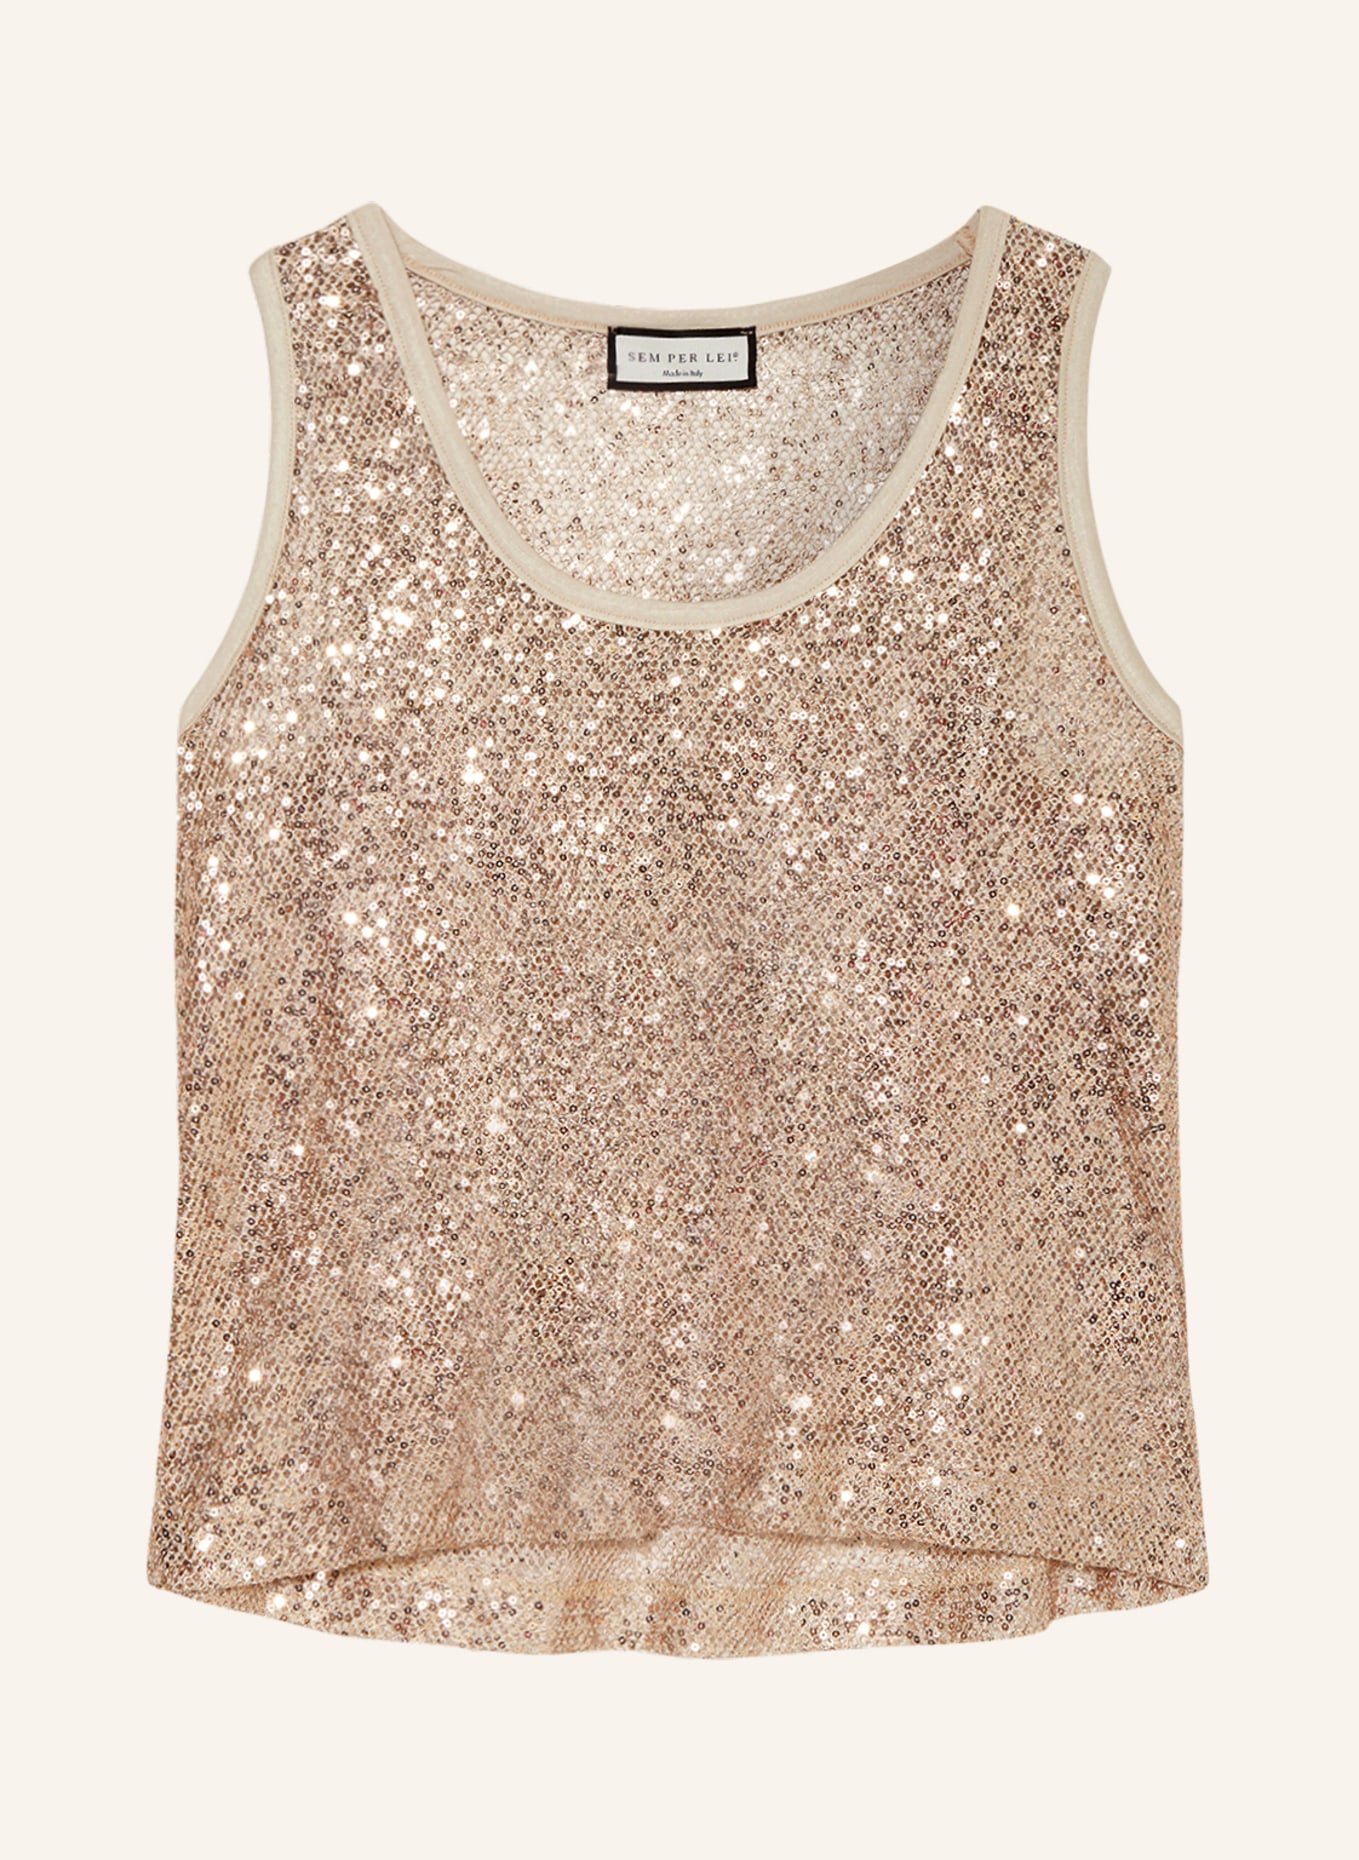 SEM PER LEI Mesh tops with sequins, Color: ROSE GOLD (Image 1)